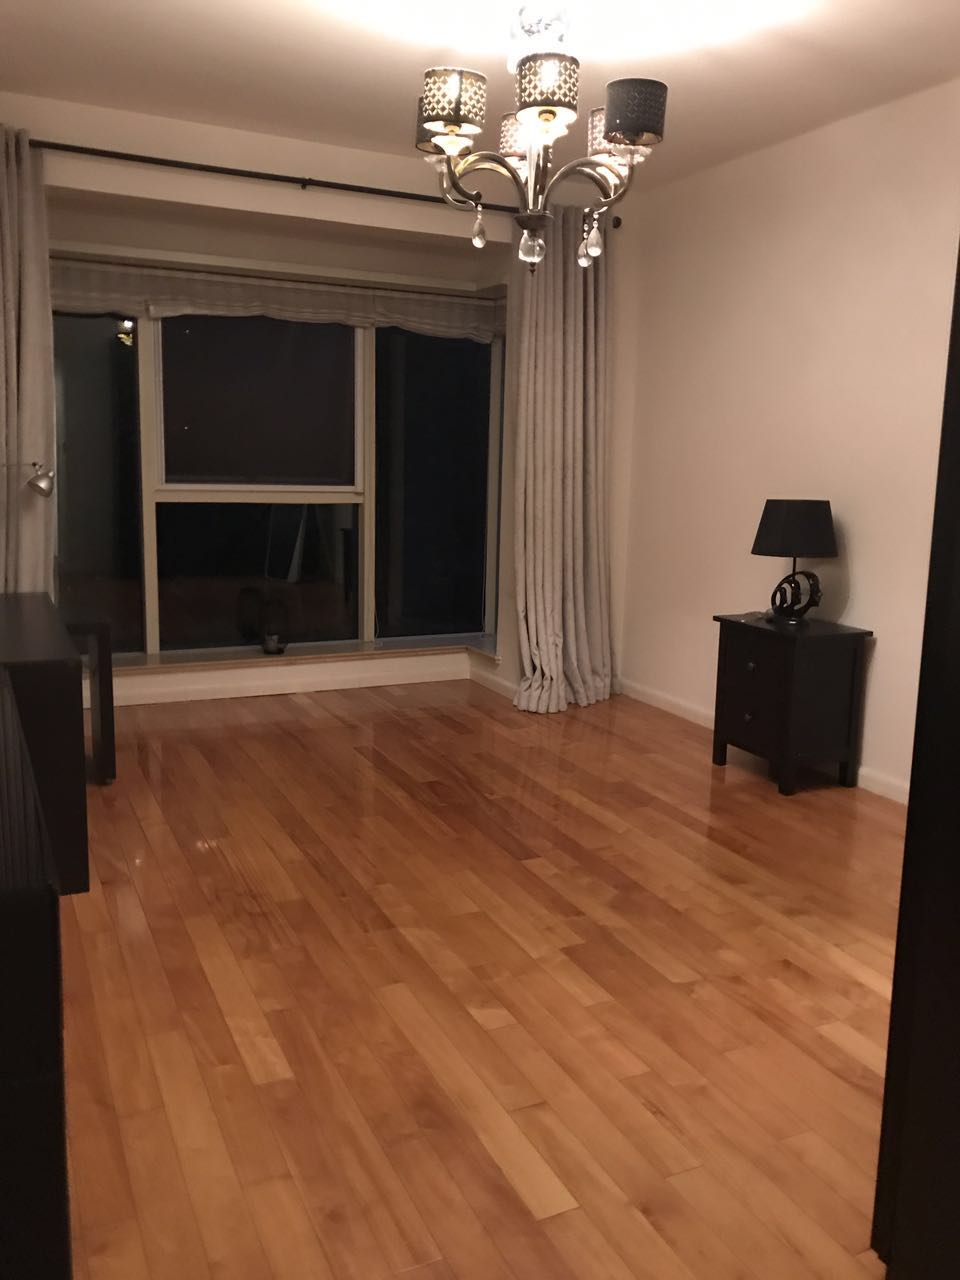 rent good comppound apartment Spacious and well maintained (176sqm) 3bedroom apartment near Nanjing W Rd in Ladoll for rent